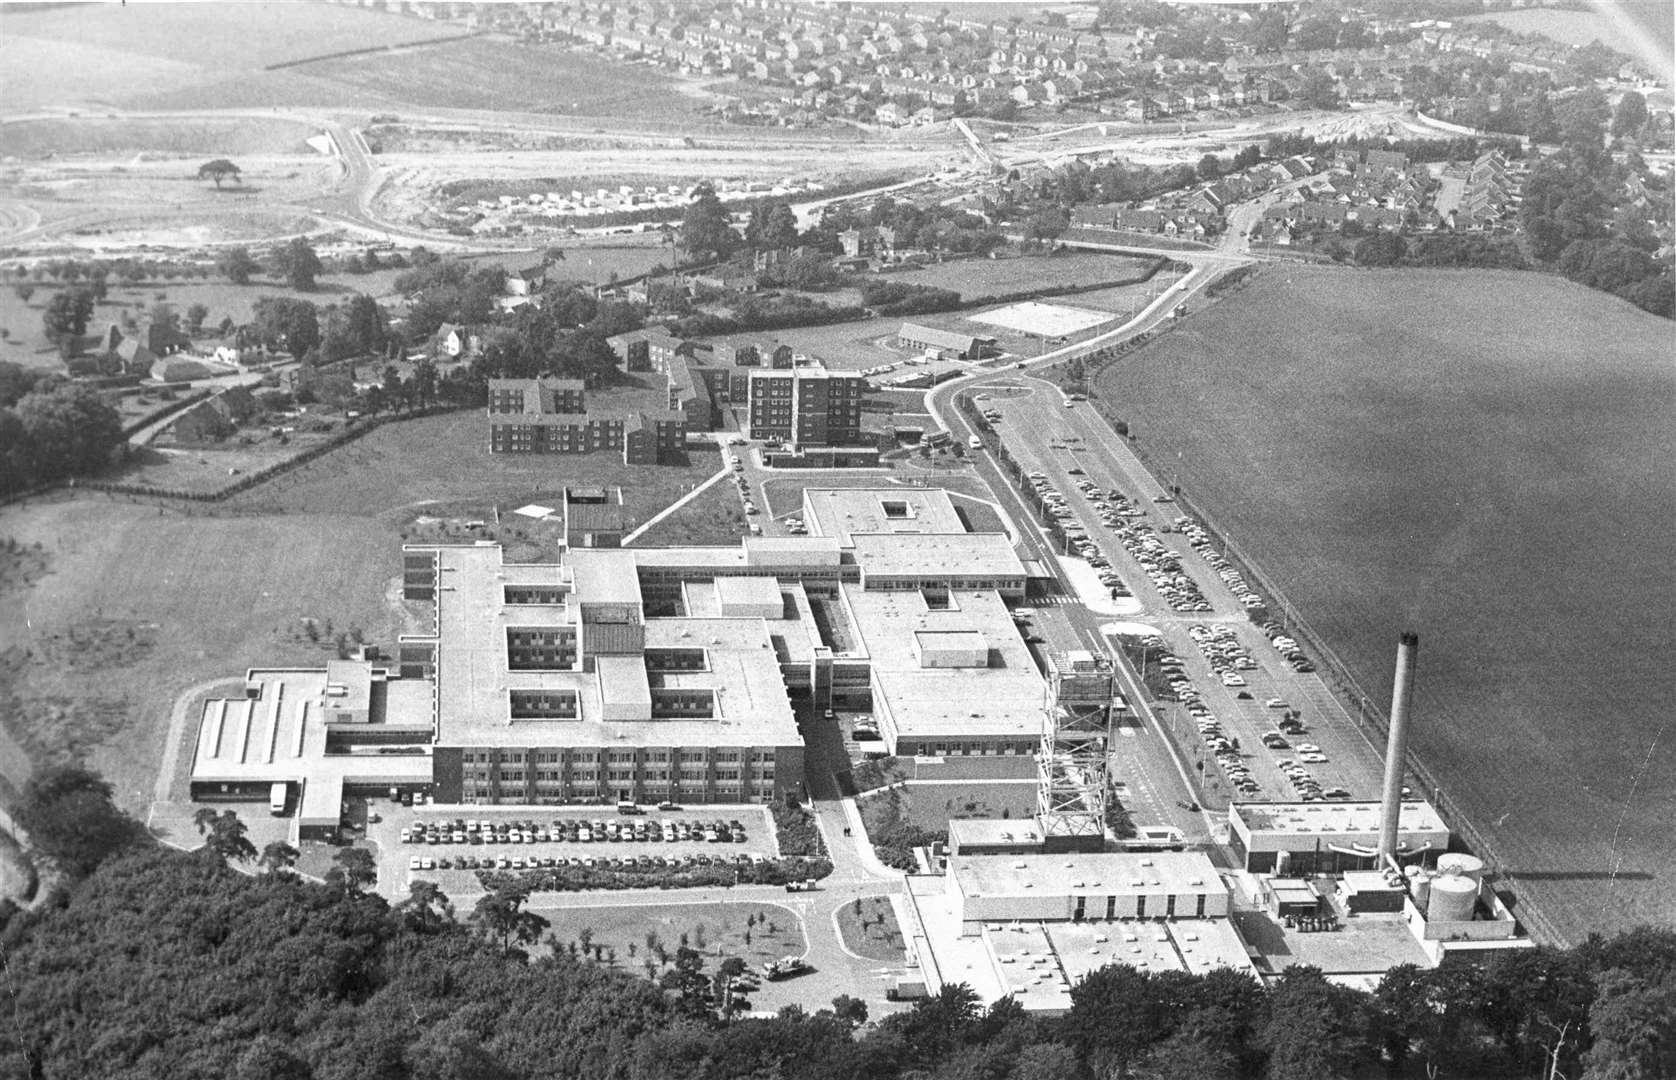 The William Harvey Hospital in September 1980. On opening it was proud to boast there should be ample free car parking space for staff, out-patients and visitors... but charges soon became a reality